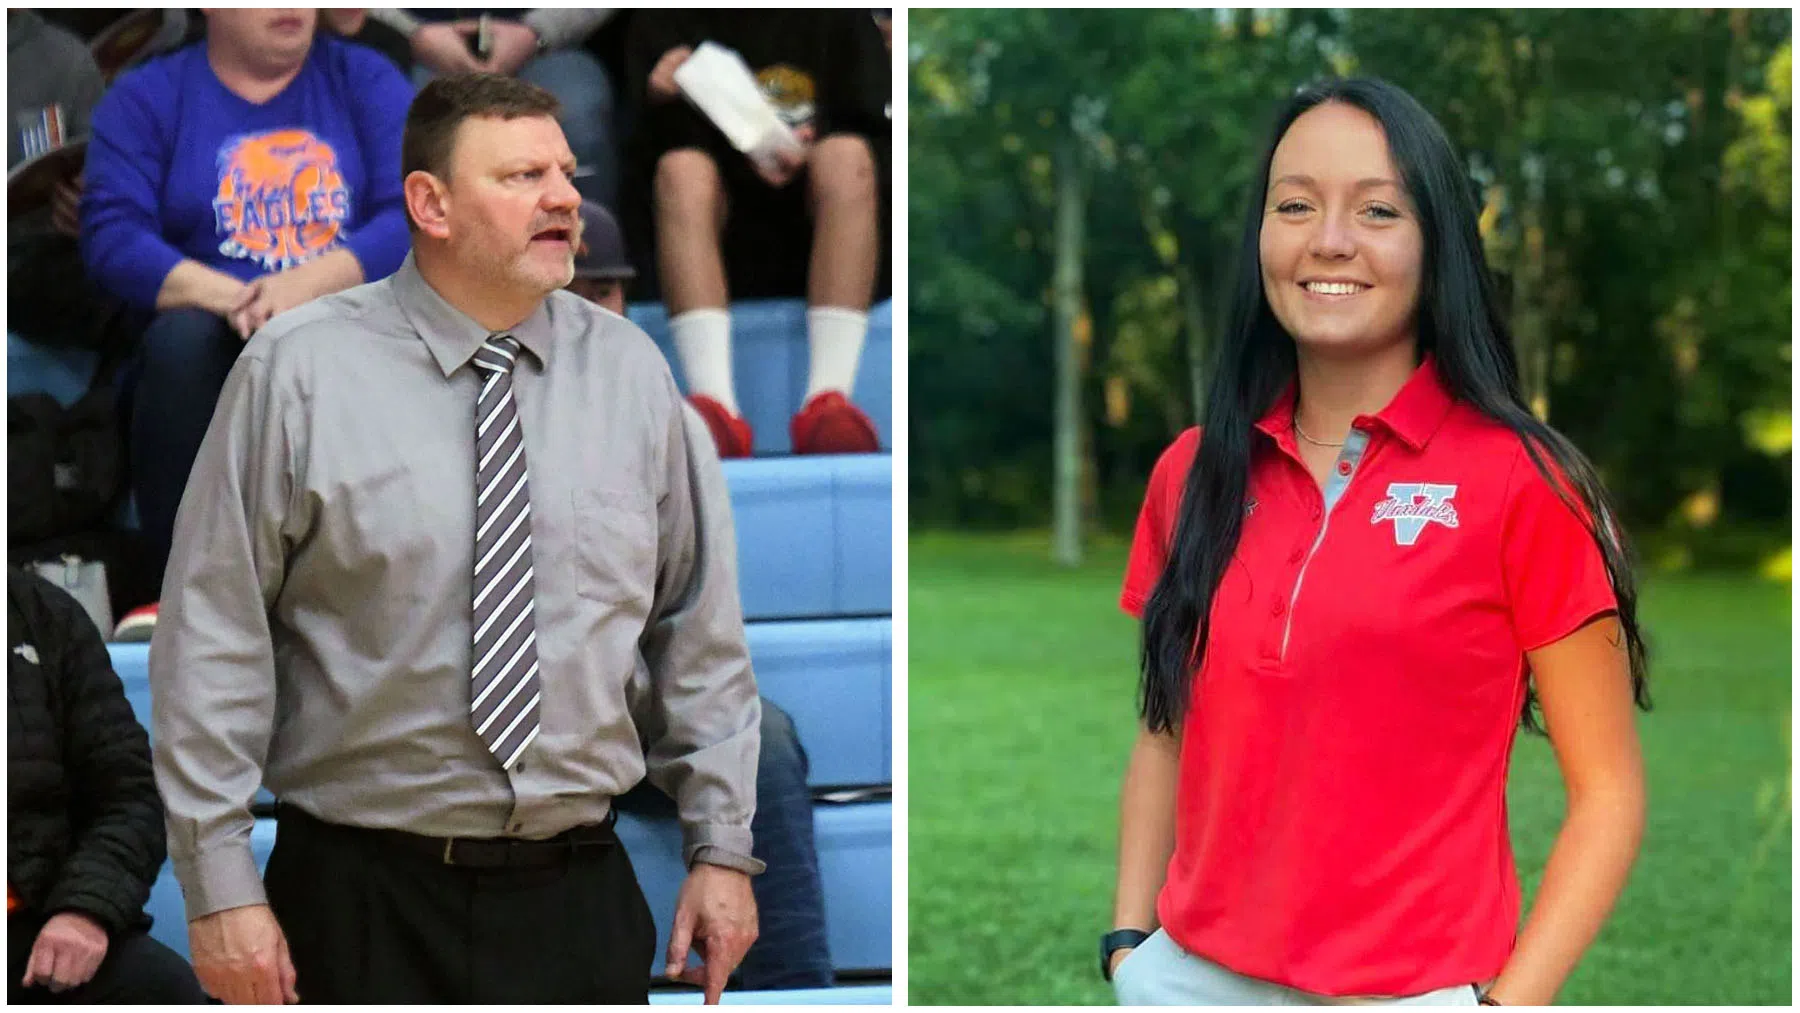 Vandalia Sports Personnel--Keely Smith hired as new Lady Vandals Volleyball Coach, Brian Kern resigns as Boys Basketball Coach